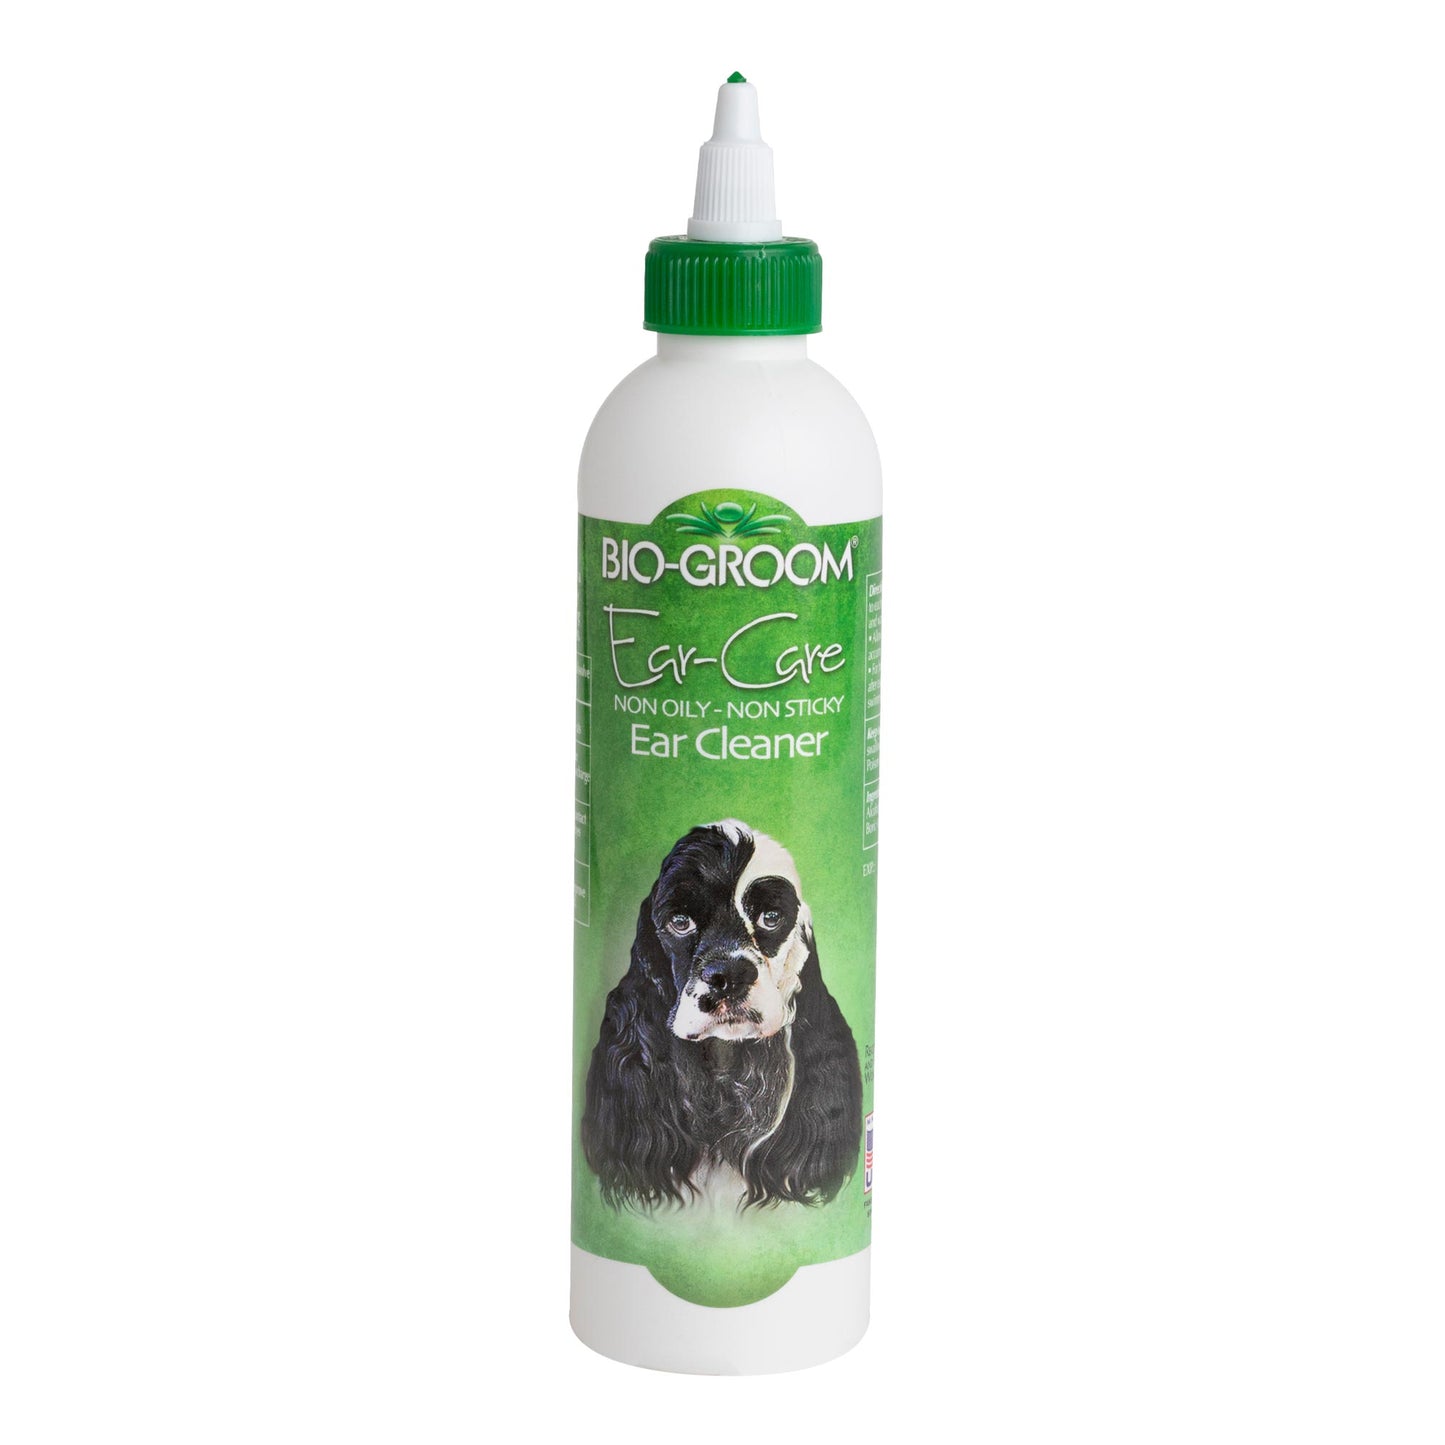 Ear care cleaner